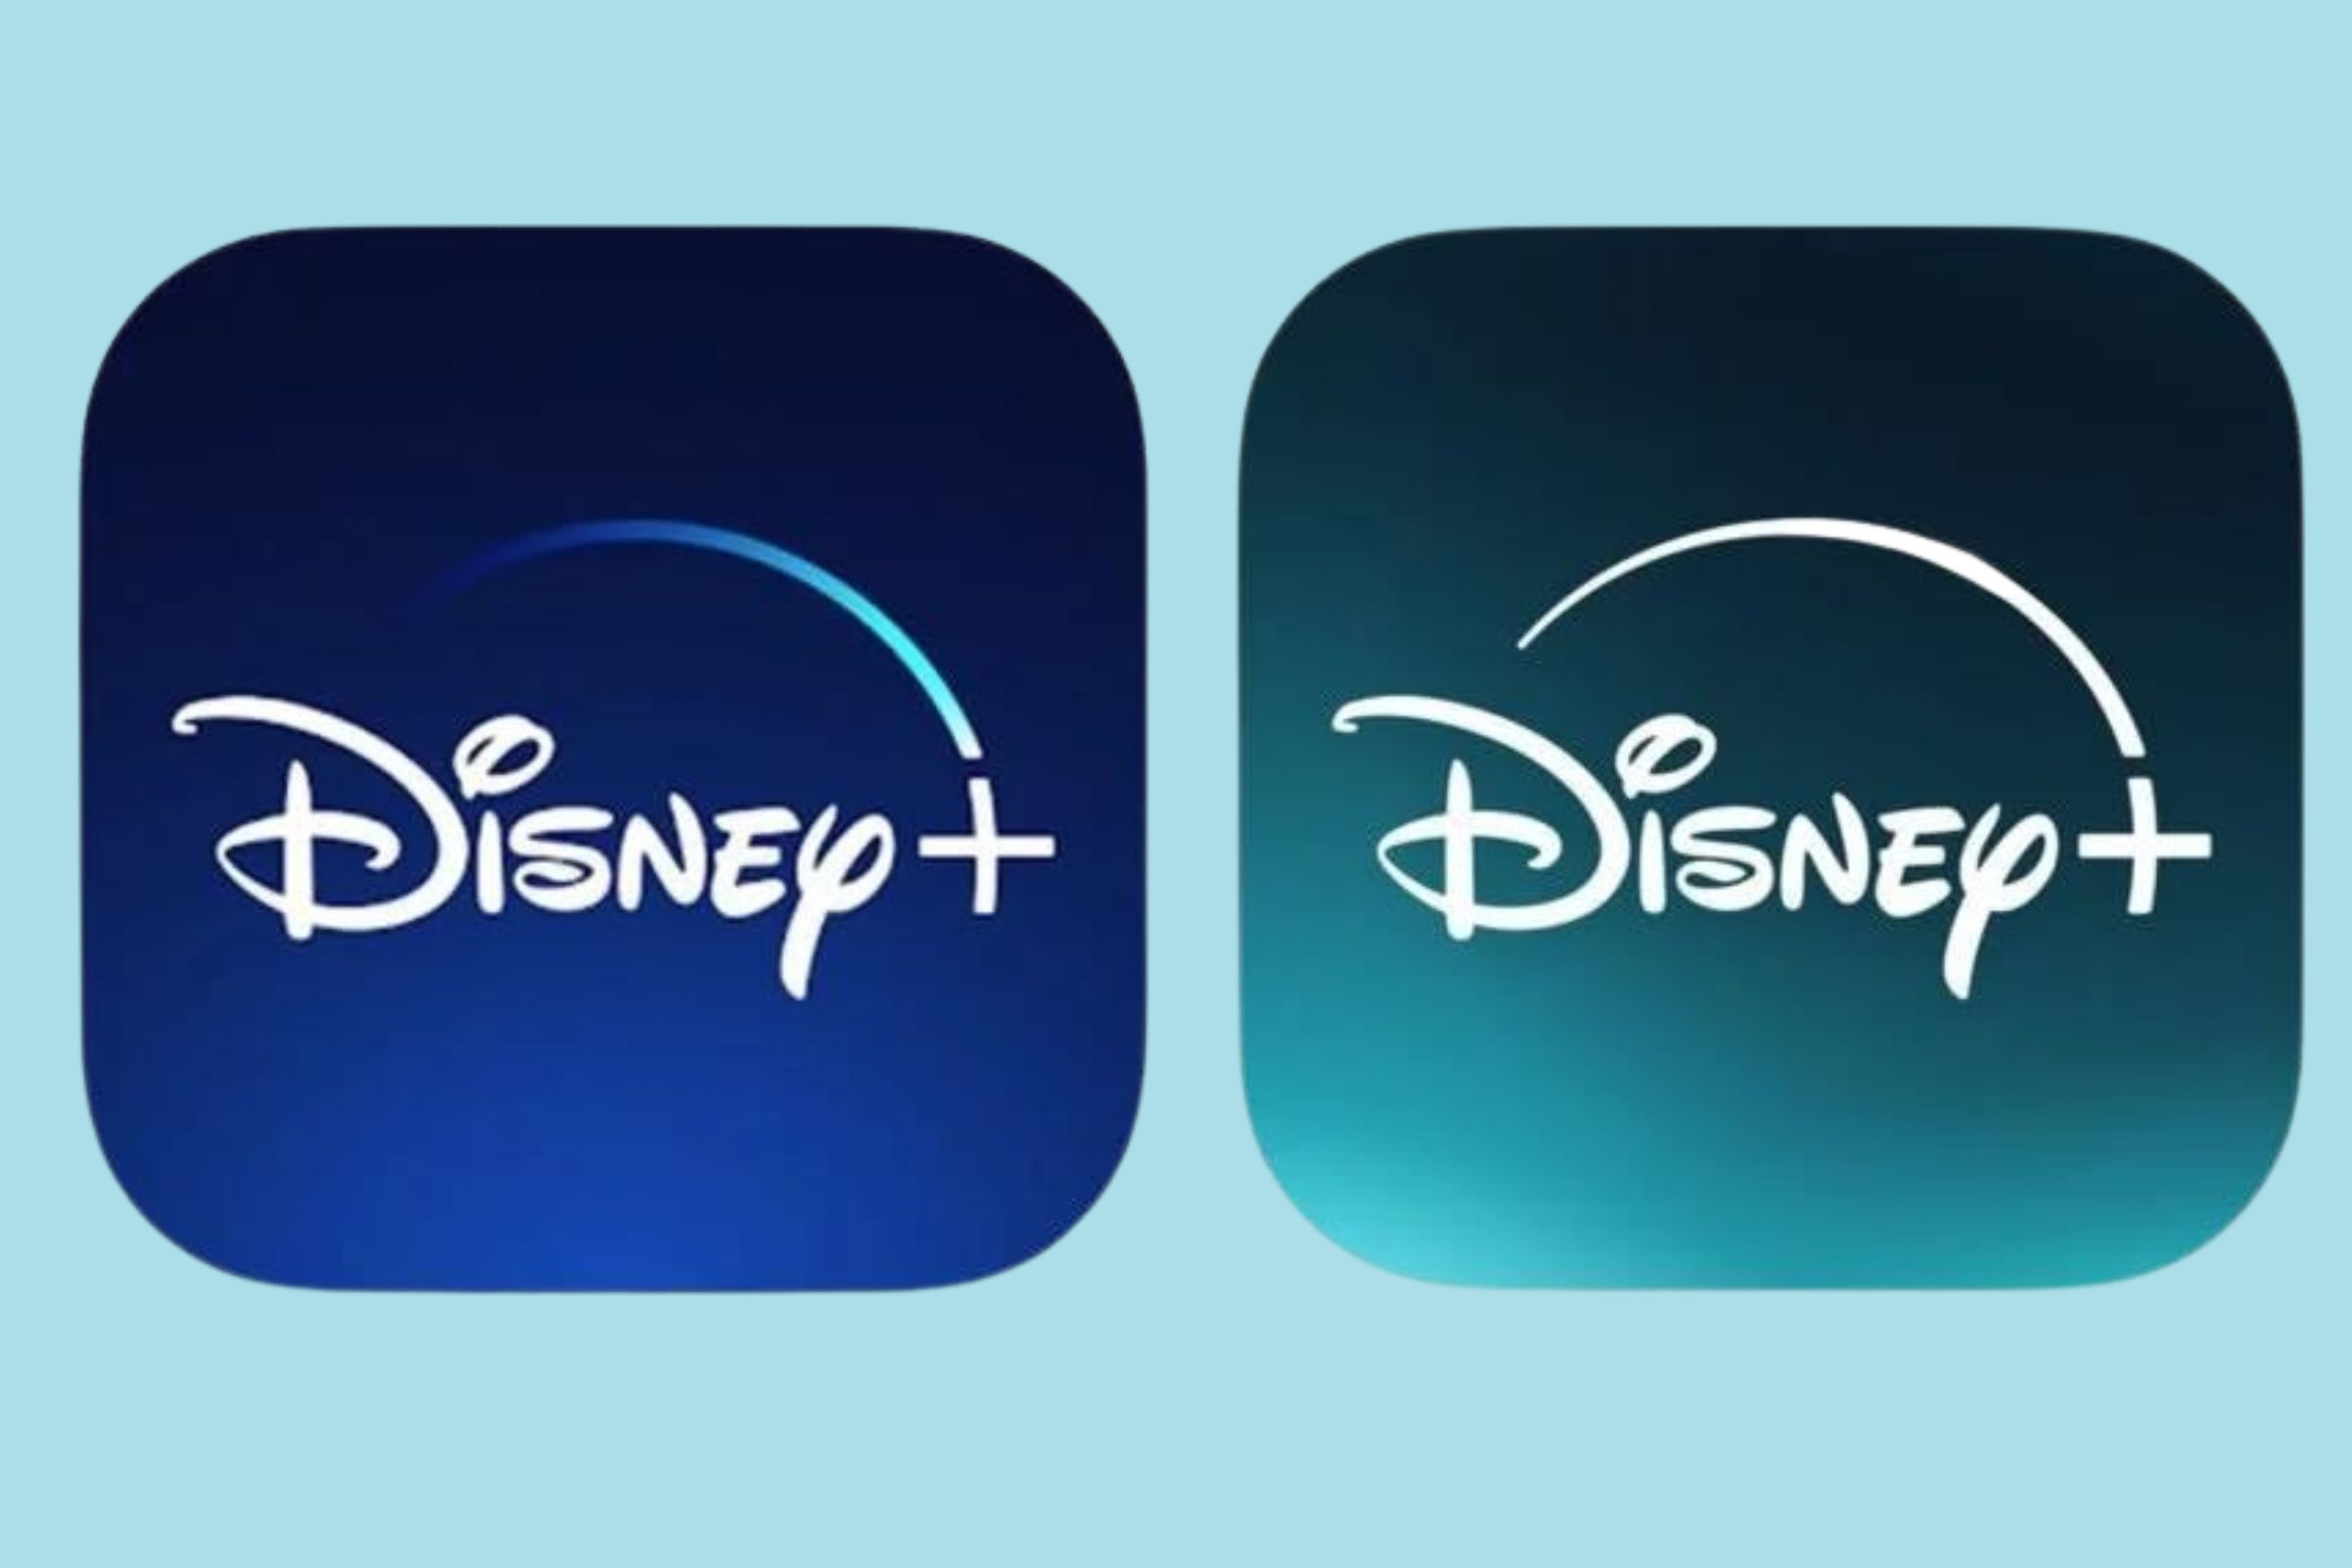 The old Disney Plus icon logo (left) compared with the updated teal one (right).